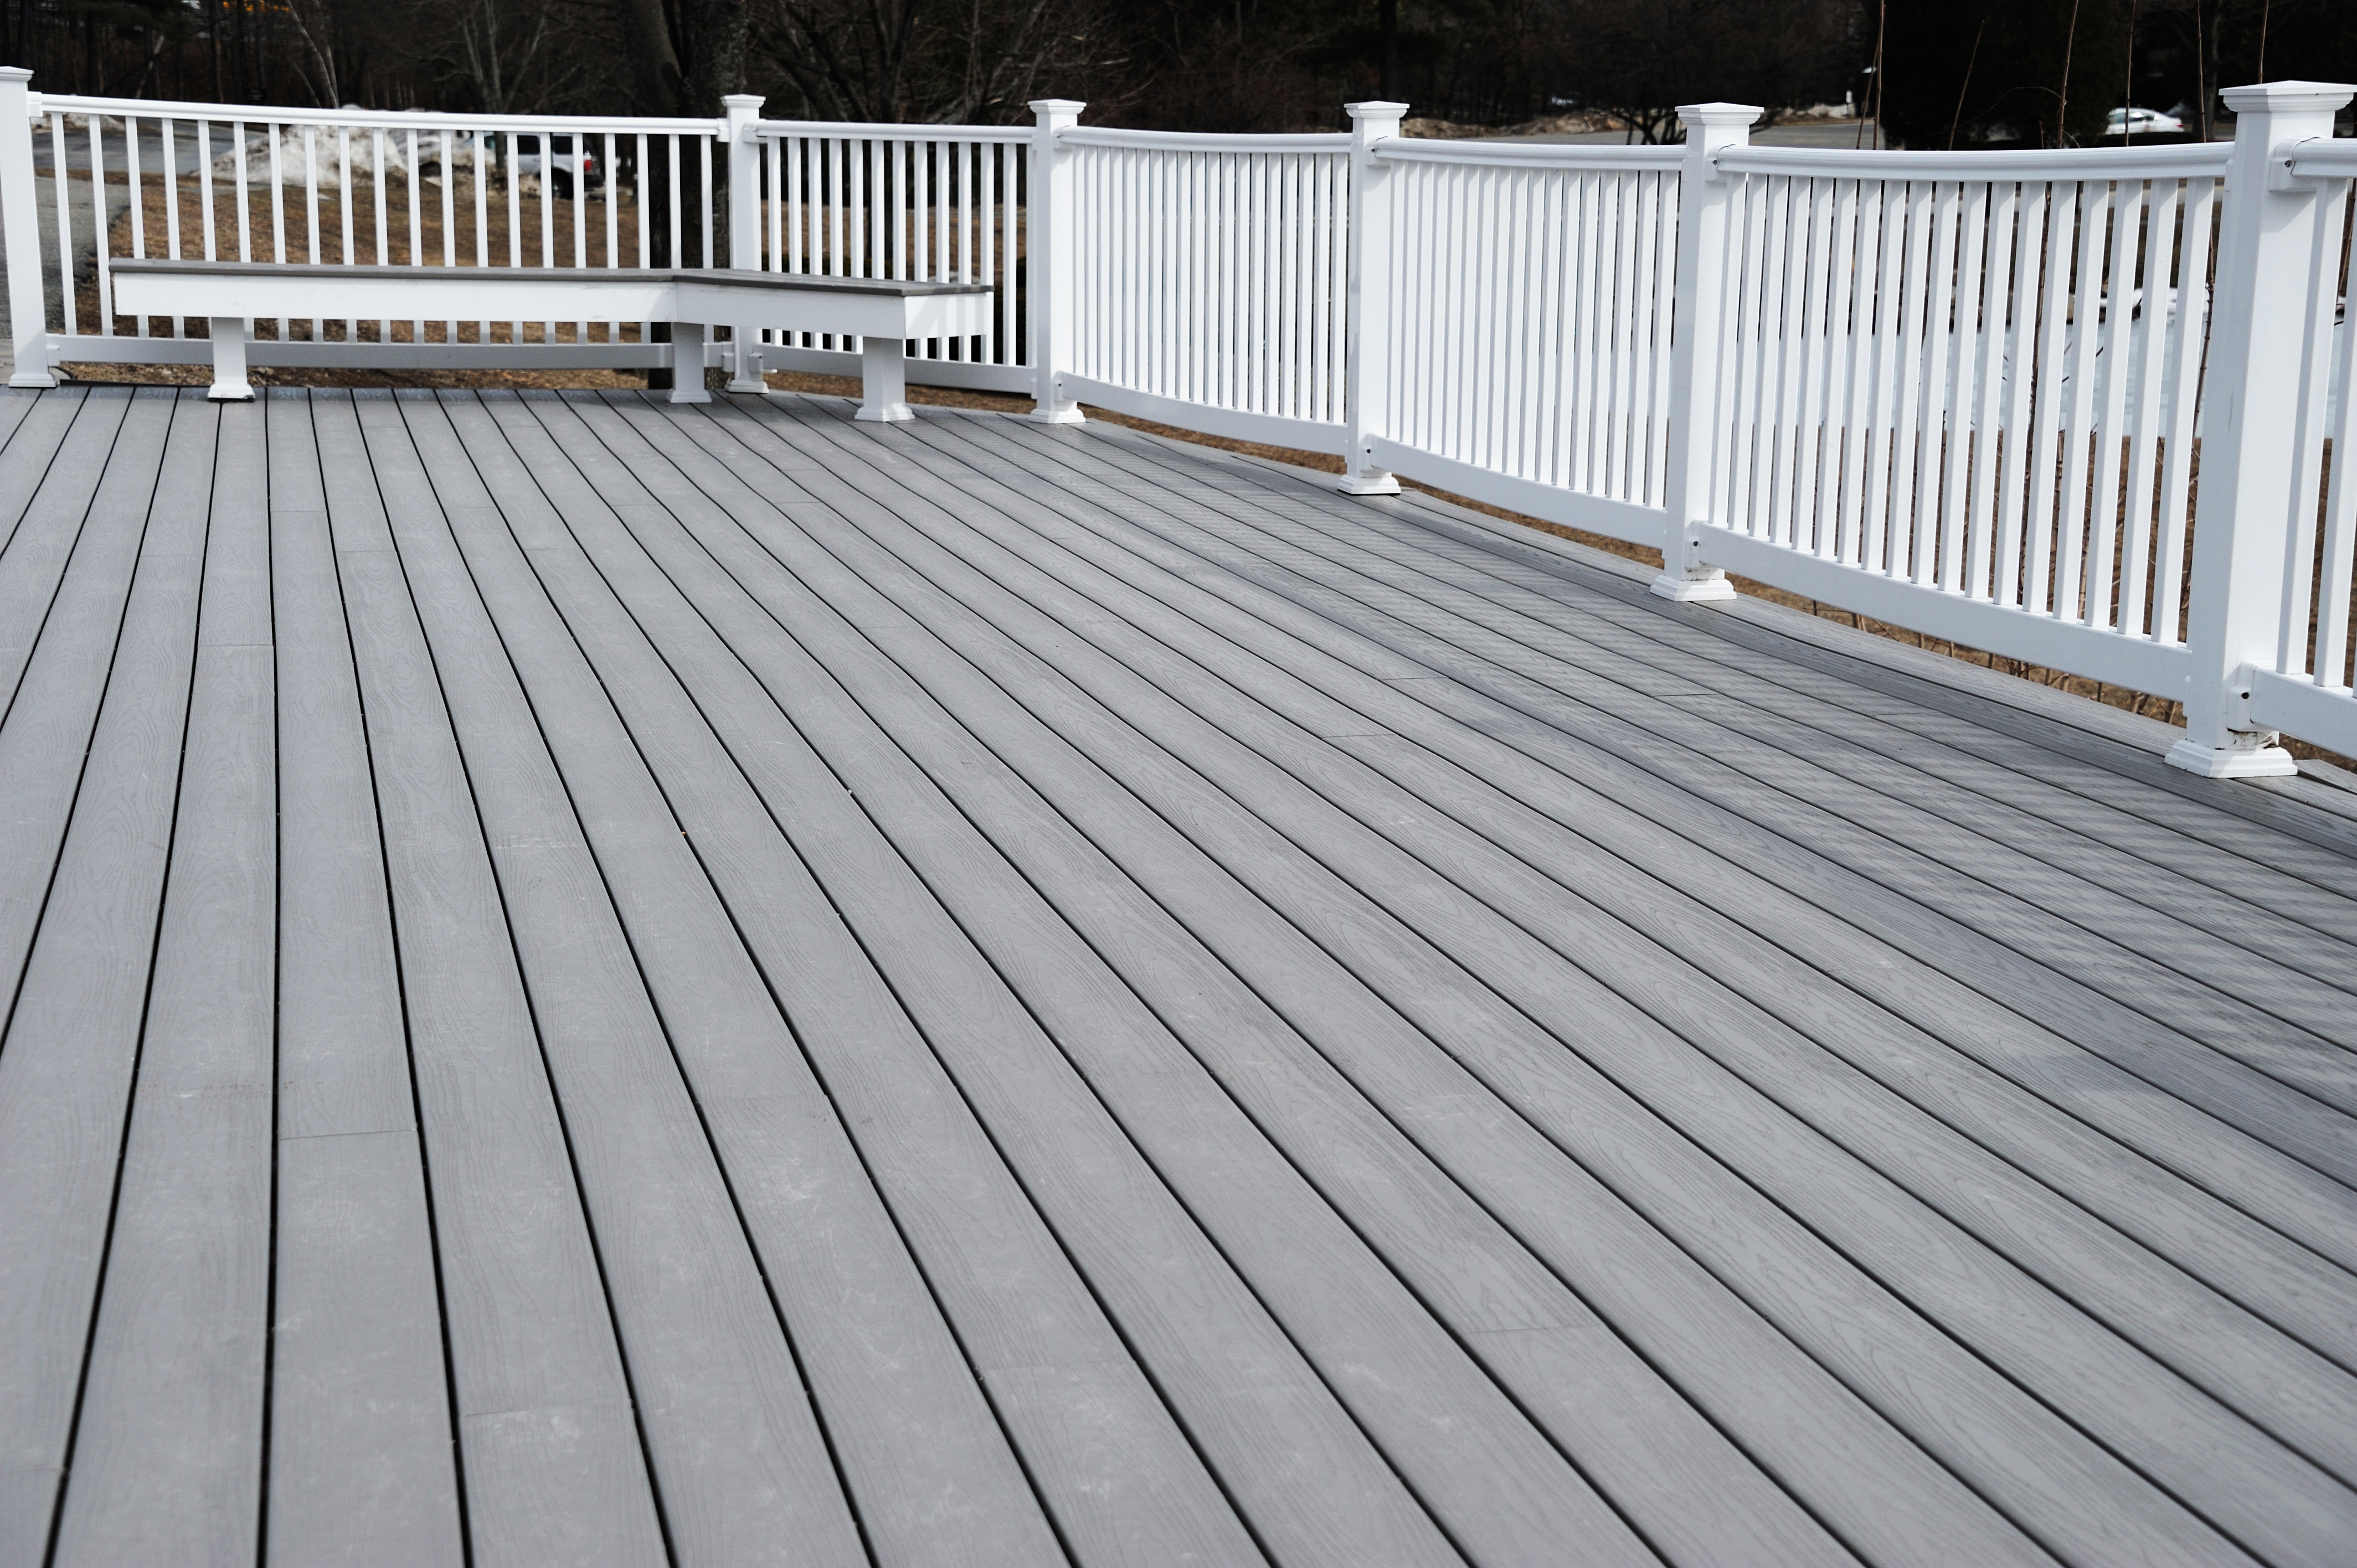 Your Deck Is a Major Part of Your Home